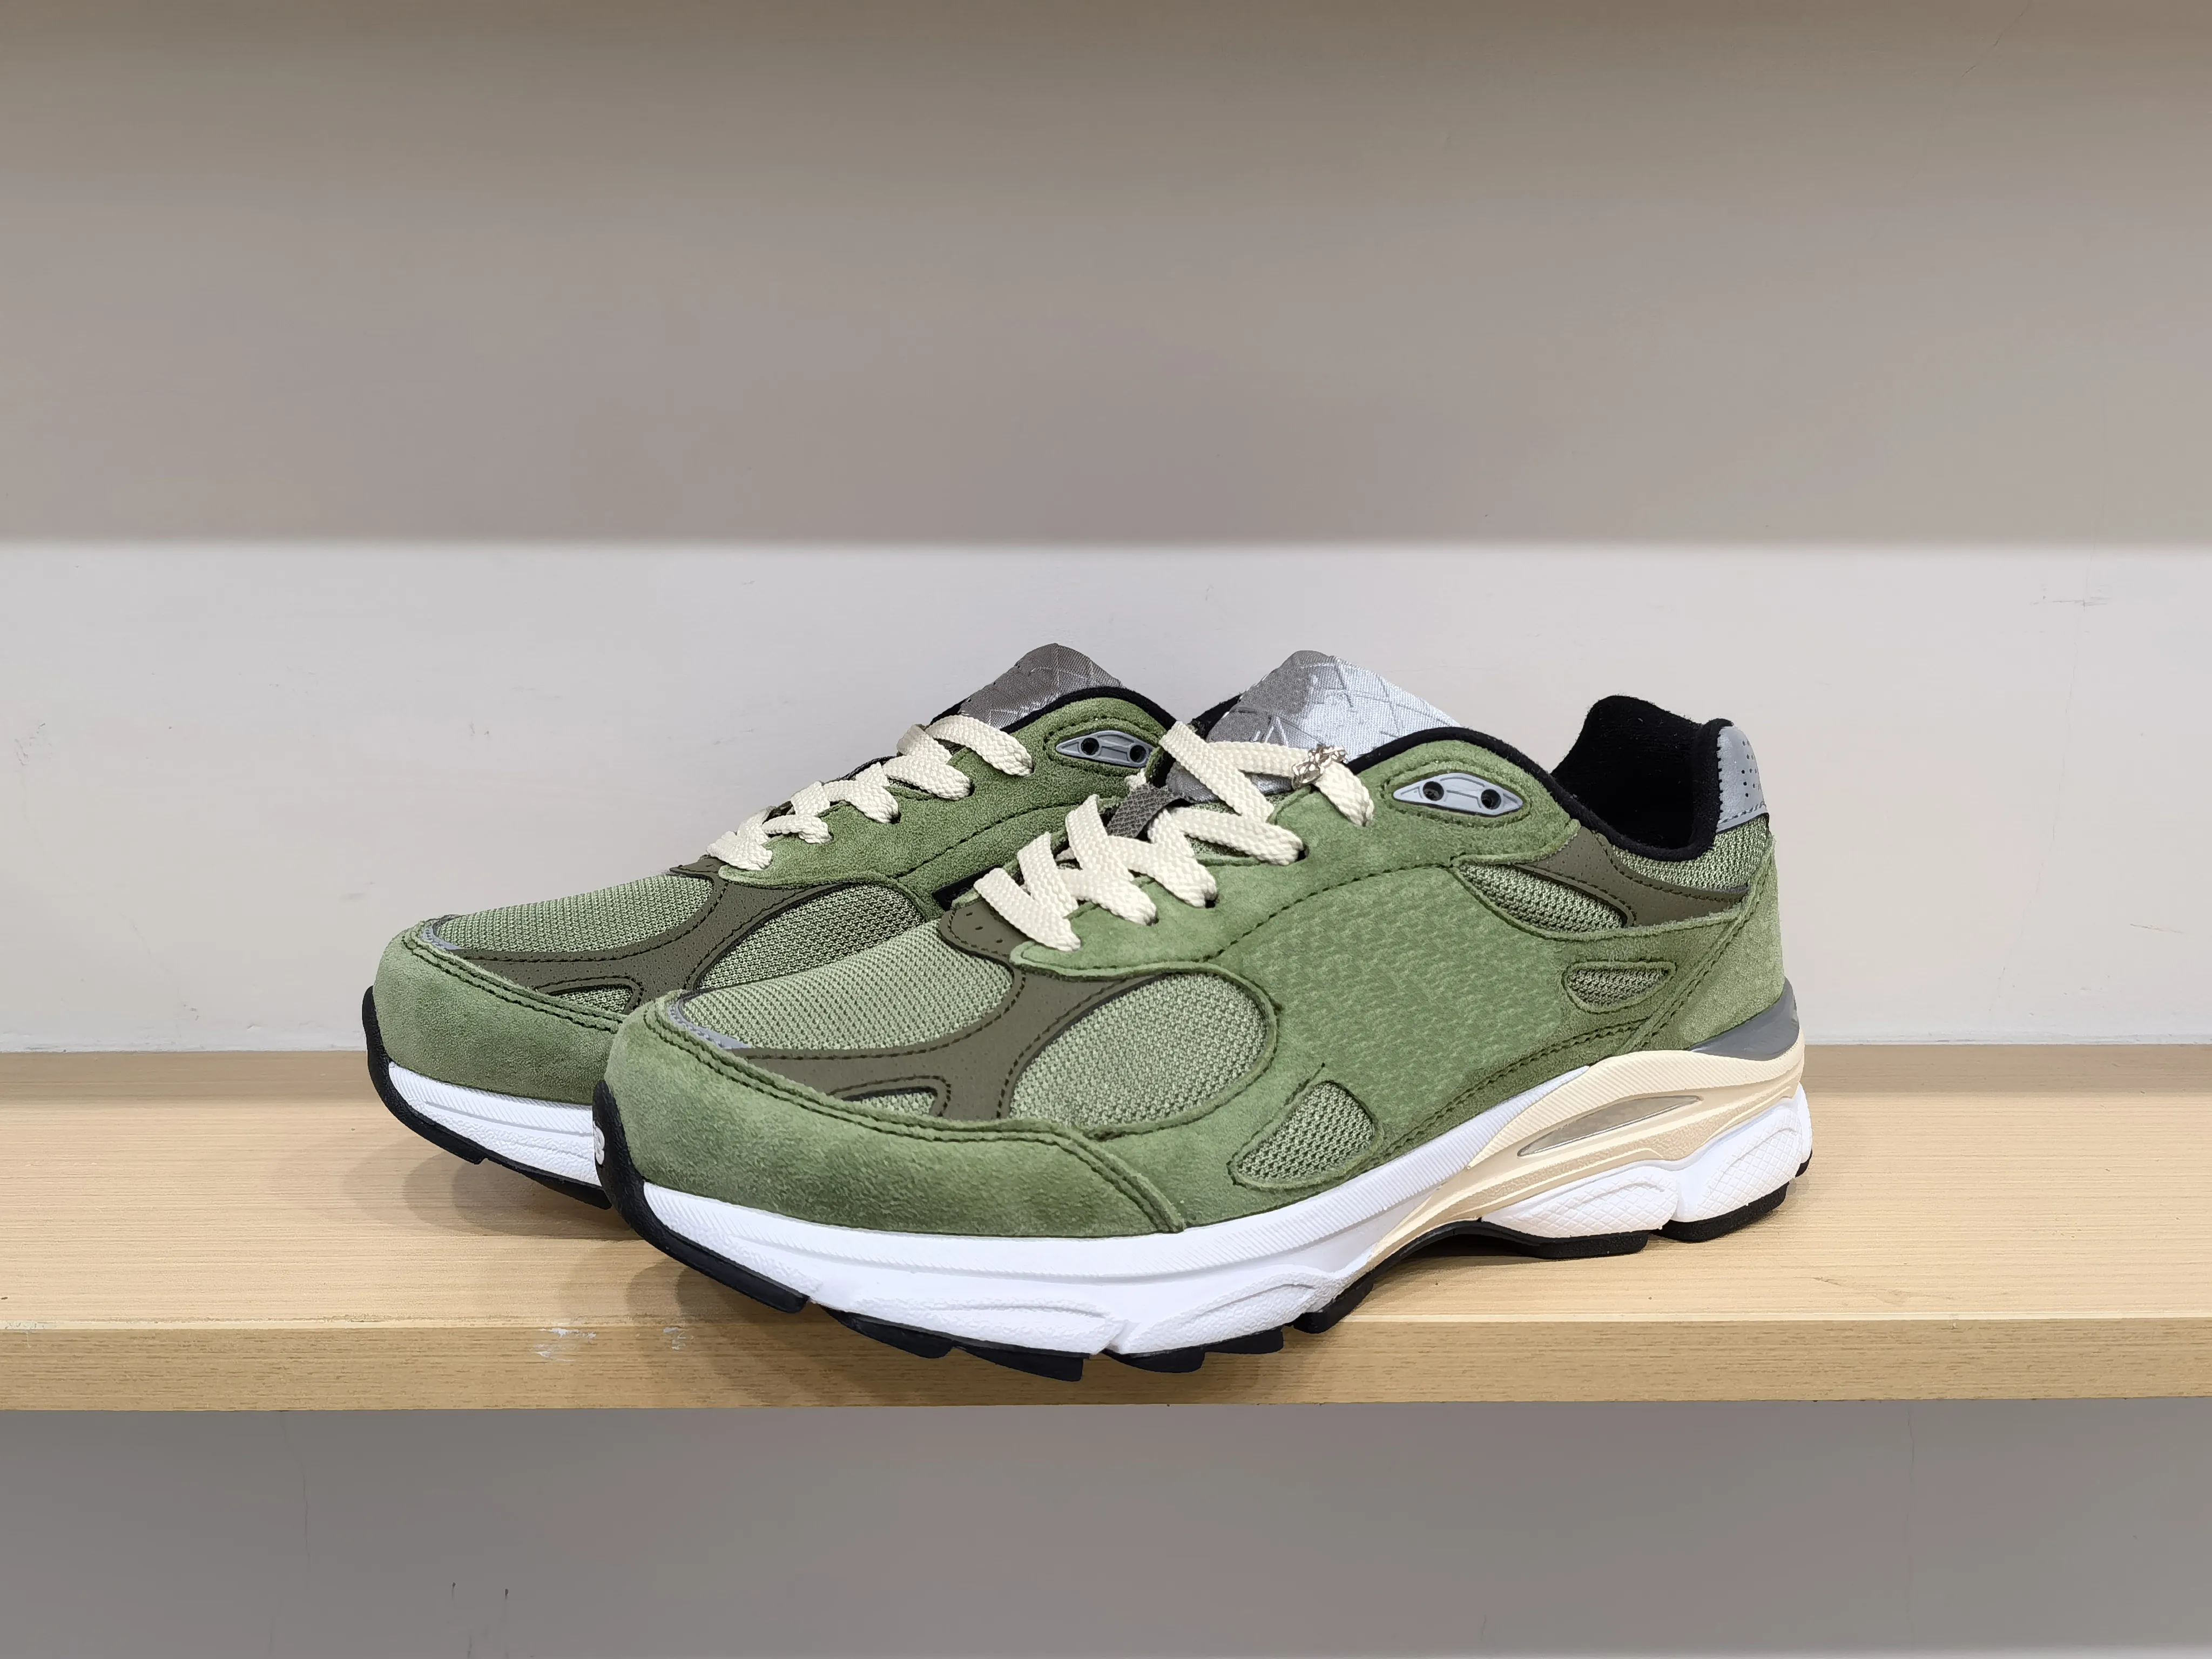 Introducing the new NIKE M2K TECHNO,Fresh and hot🔥🔥. The real gees will  cop this before the price goe… | Fashion shoes sneakers, Cool nike shoes,  Streetwear shoes